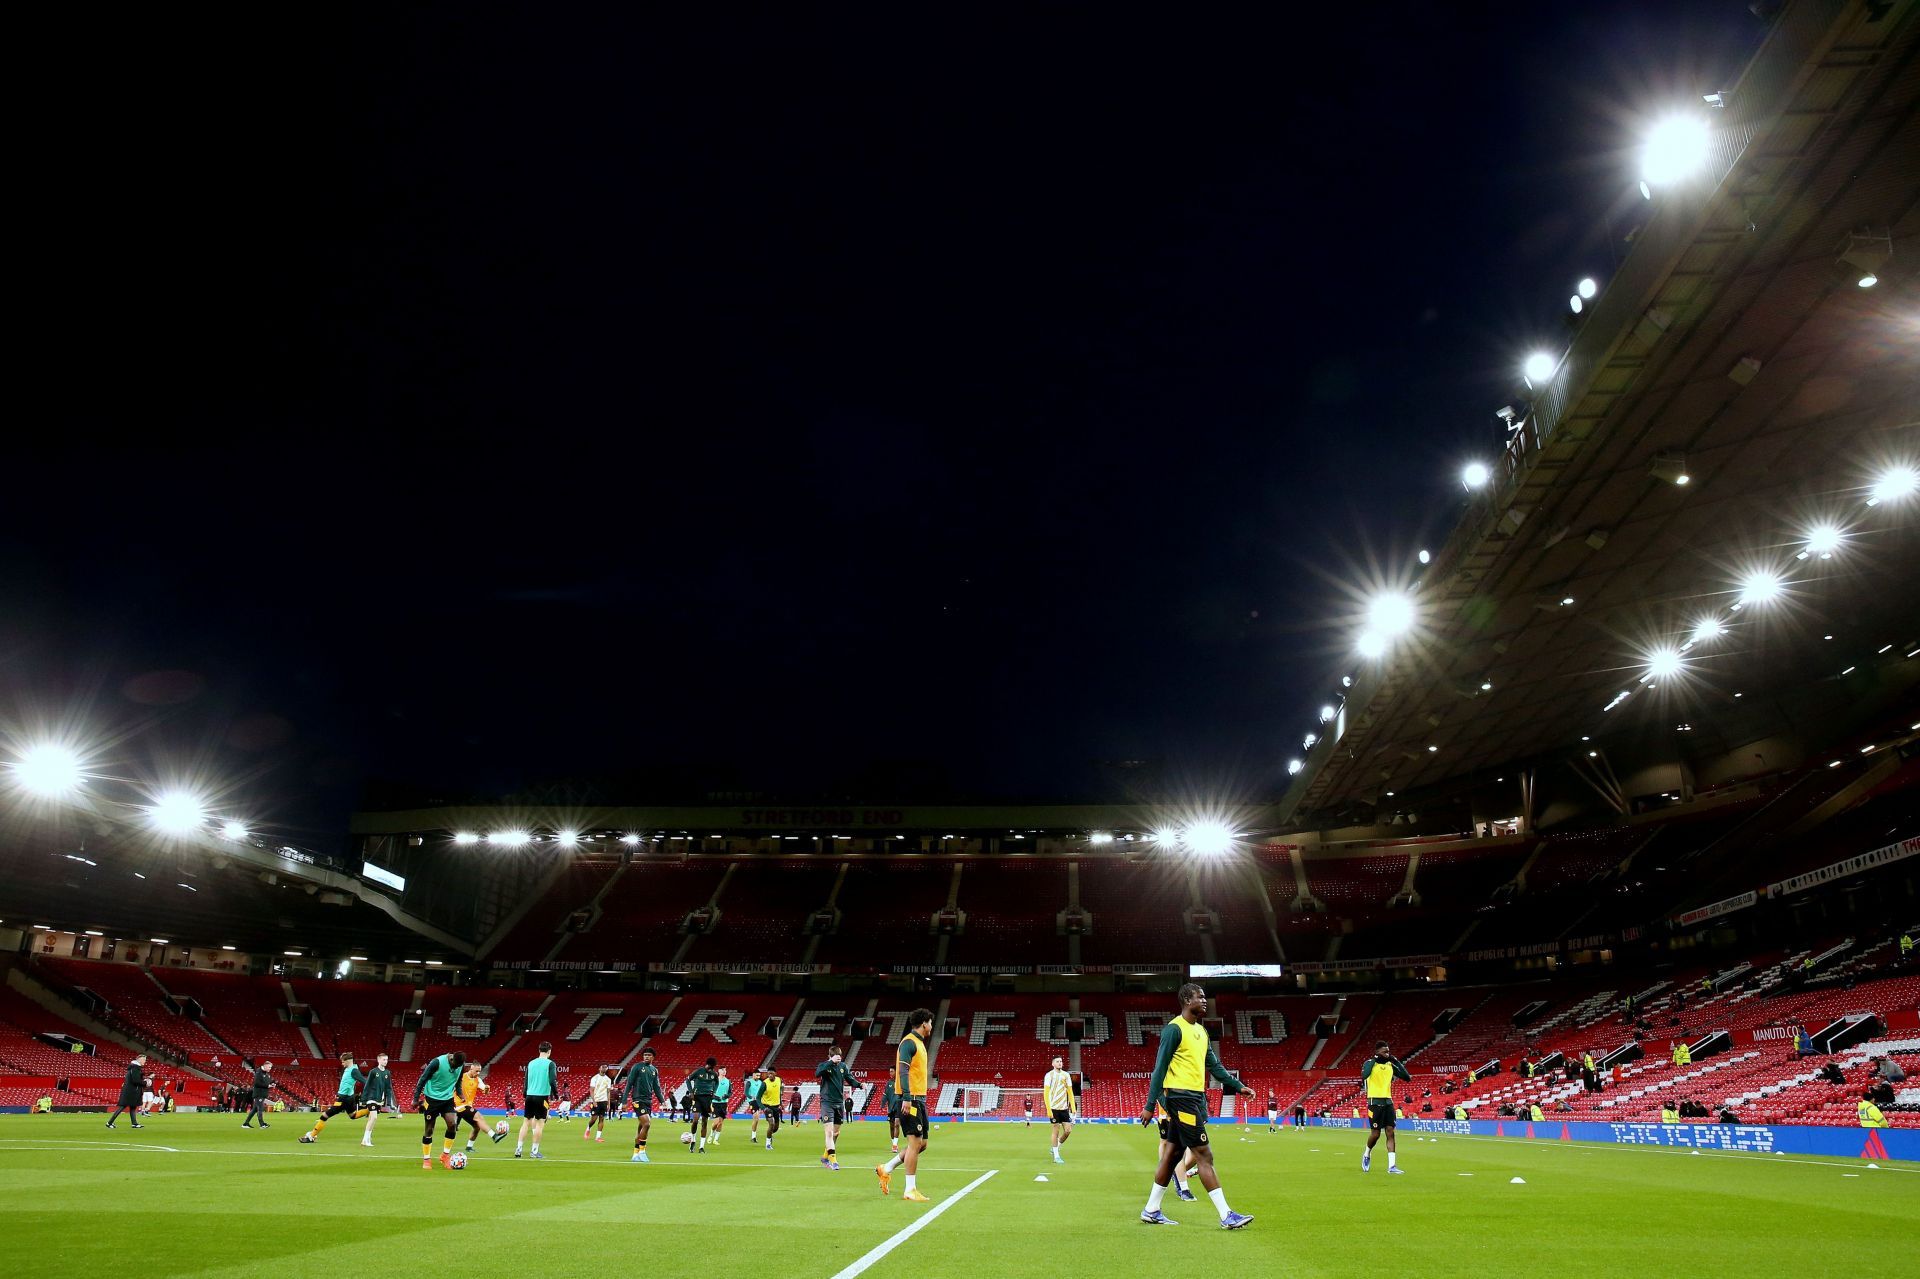 Will Old Trafford light up again under the night skies for Champions&#039;s League football next season?